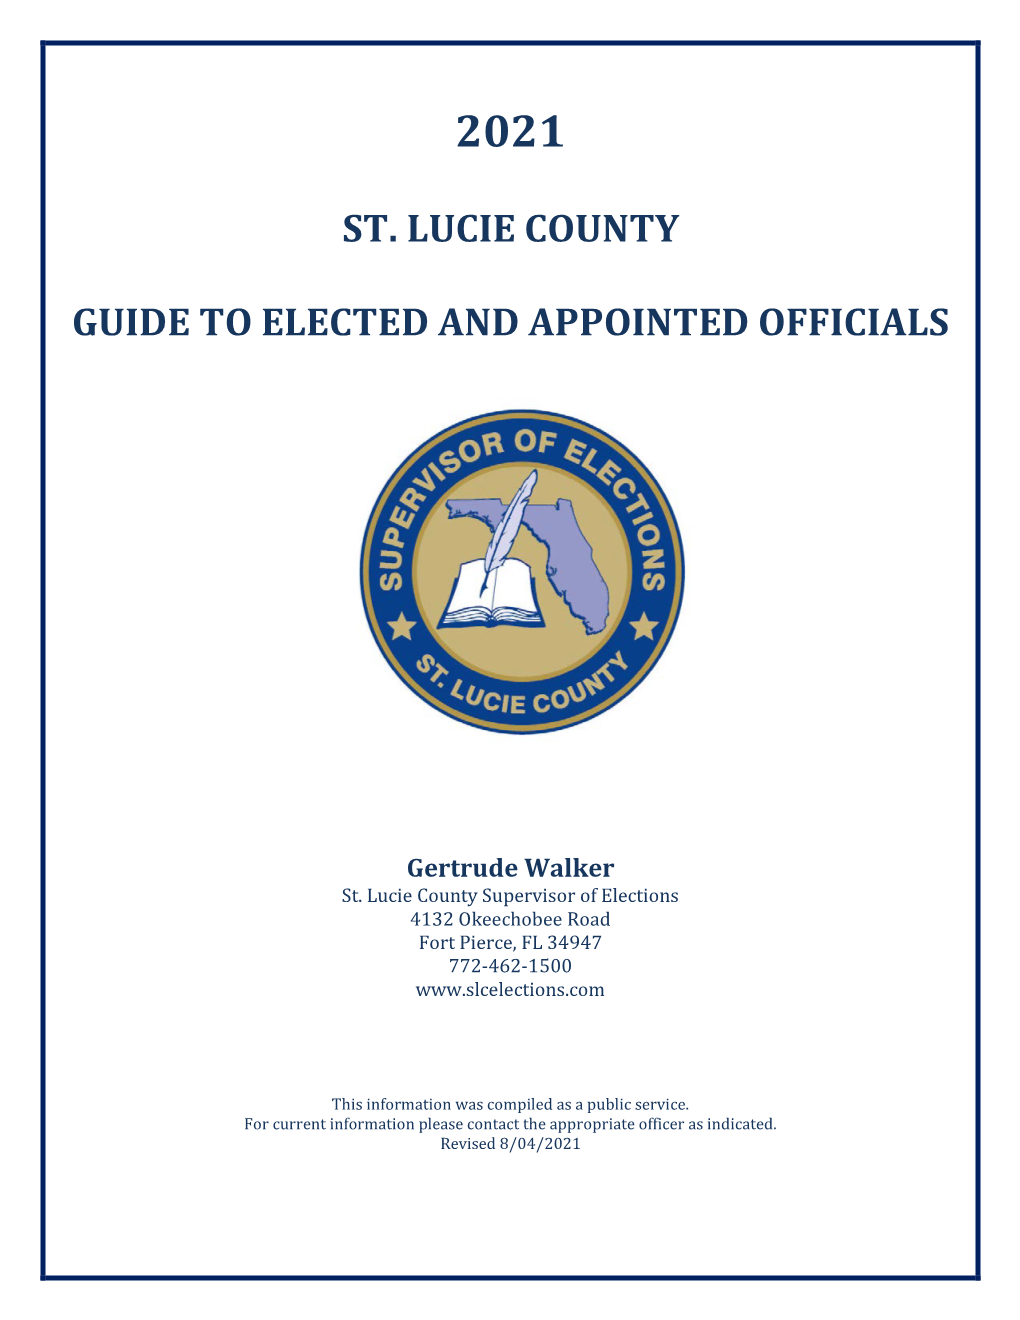 St. Lucie County Guide to Elected and Appointed